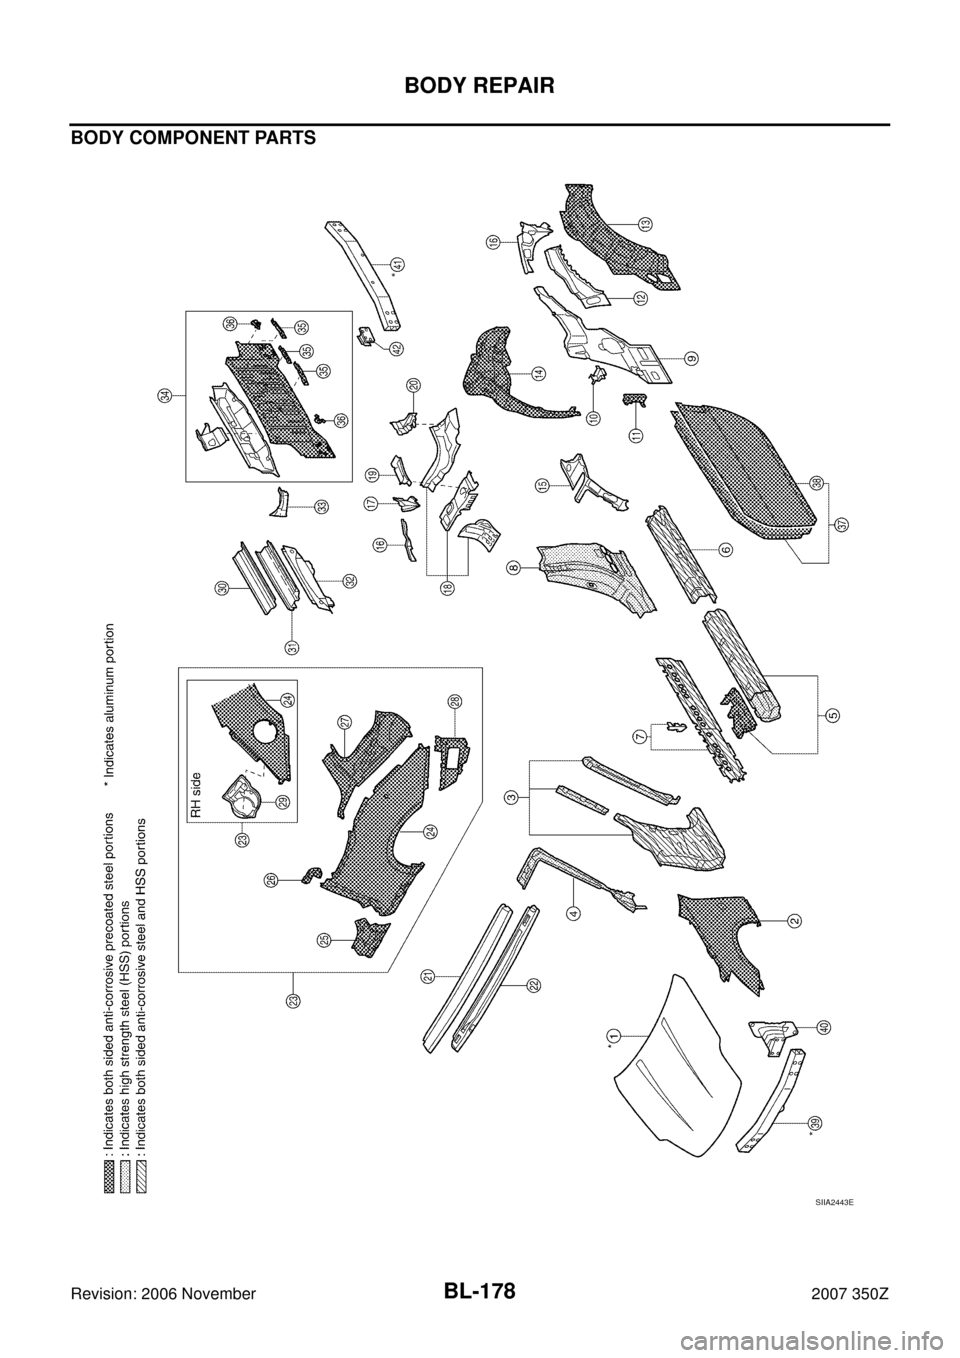 NISSAN 350Z 2007 Z33 Body, Lock And Security System Workshop Manual BL-178
BODY REPAIR
Revision: 2006 November2007 350Z
BODY COMPONENT PARTS
SIIA2443E 